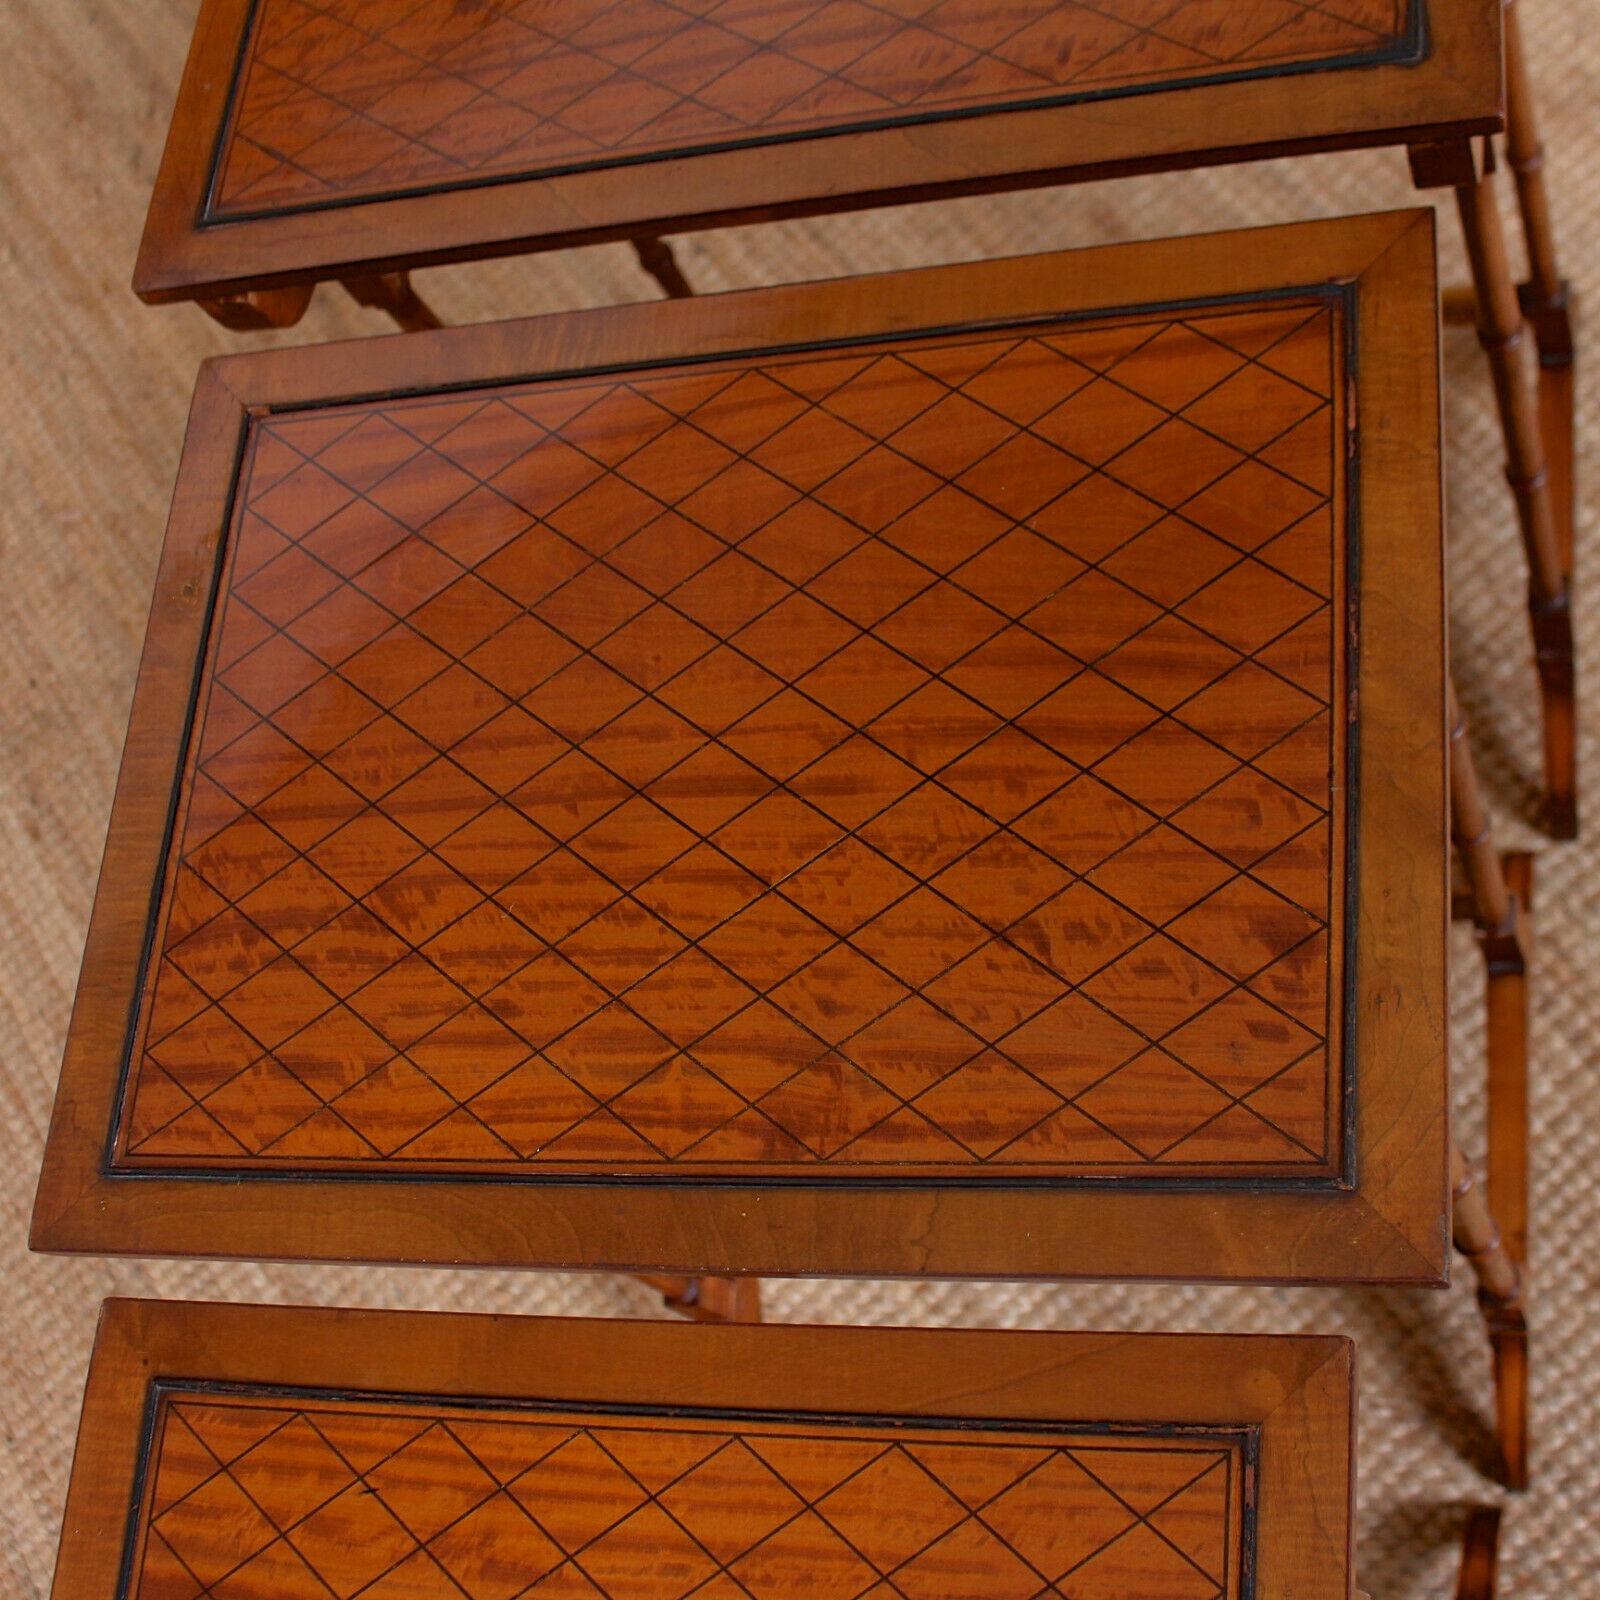 20th Century English Nest of Tables Satinwood Crossbanded 3 Side Tables Tall Georgian For Sale